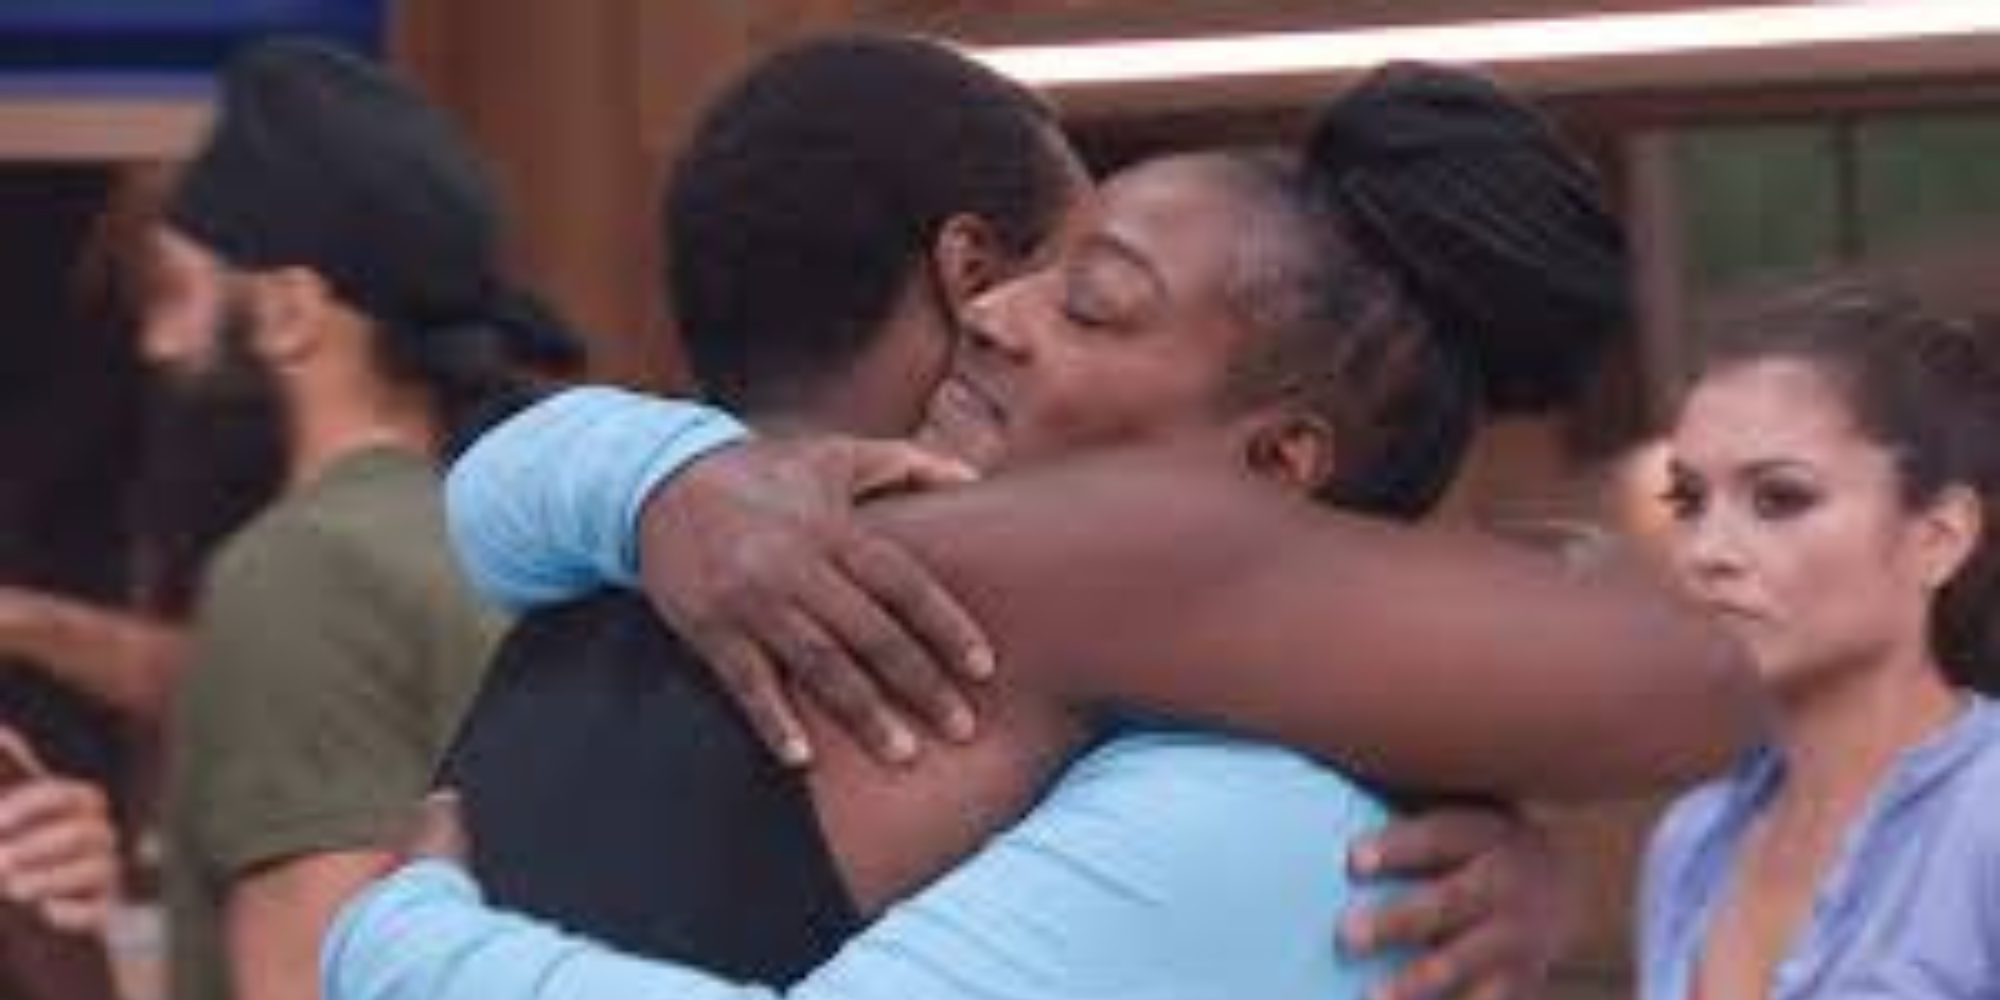 big brother jared and cirie fields hugging